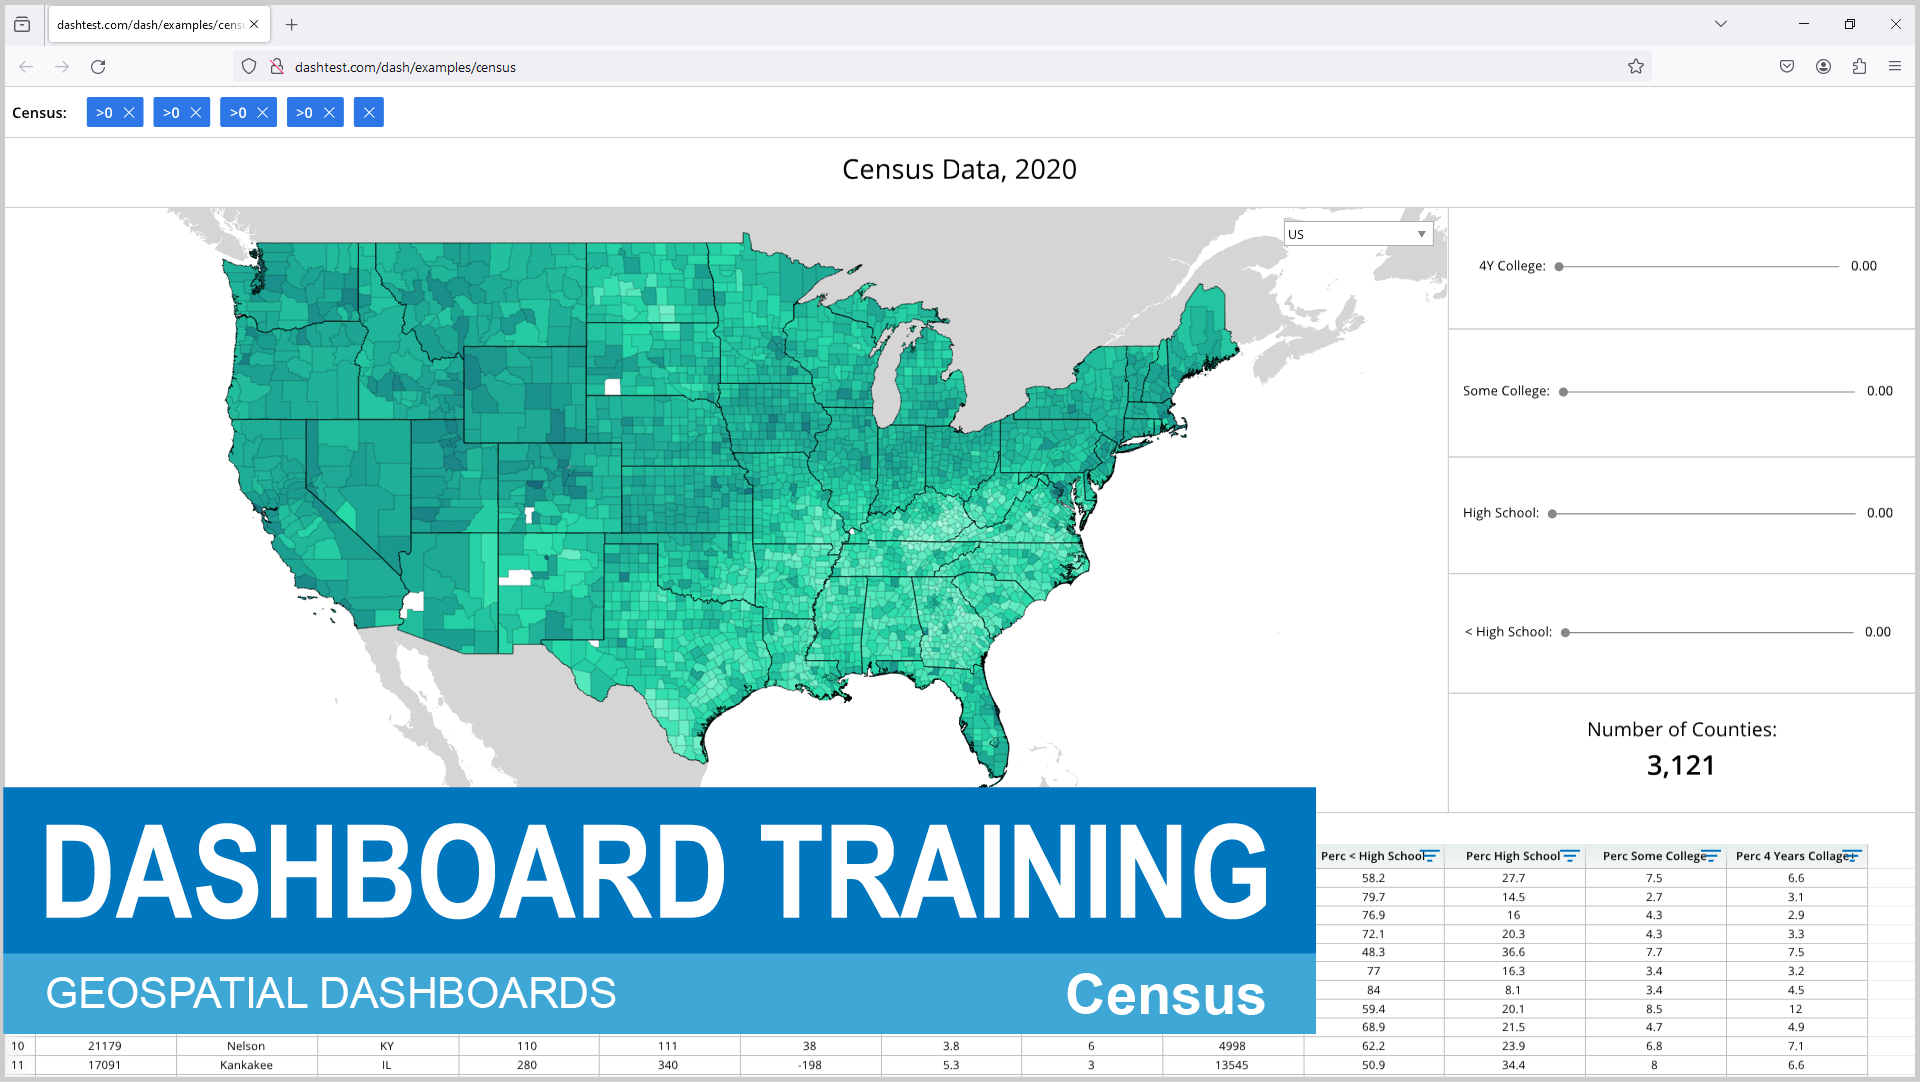 A screenshot of a dashboard training page, displaying a map of the United States with various data points, including a green map of the country and a blue map of the United States. The image is captioned "Geospatial Dashboard Training" and features a blue and white color scheme.